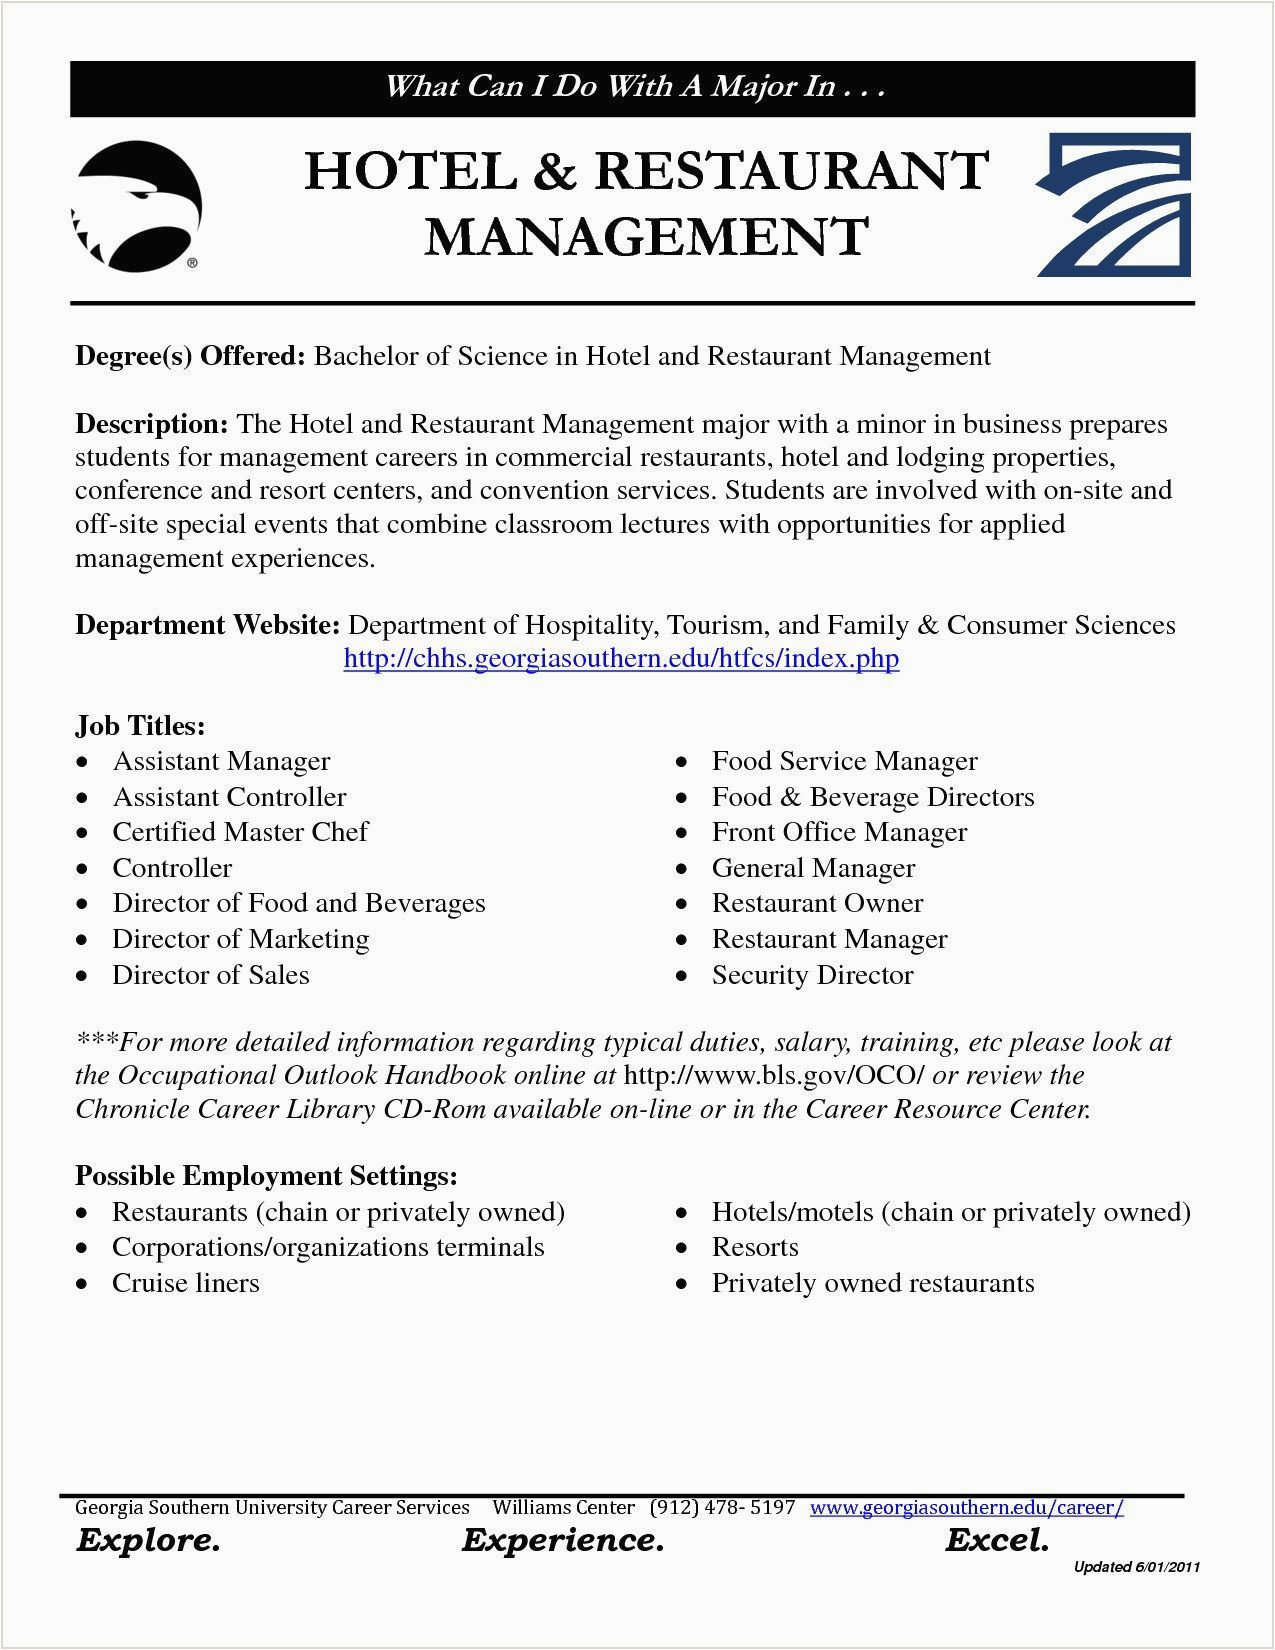 Sample Of Resume for Hotel Management Resume format In Word for Hotel Management Fresher Huroncountychamber